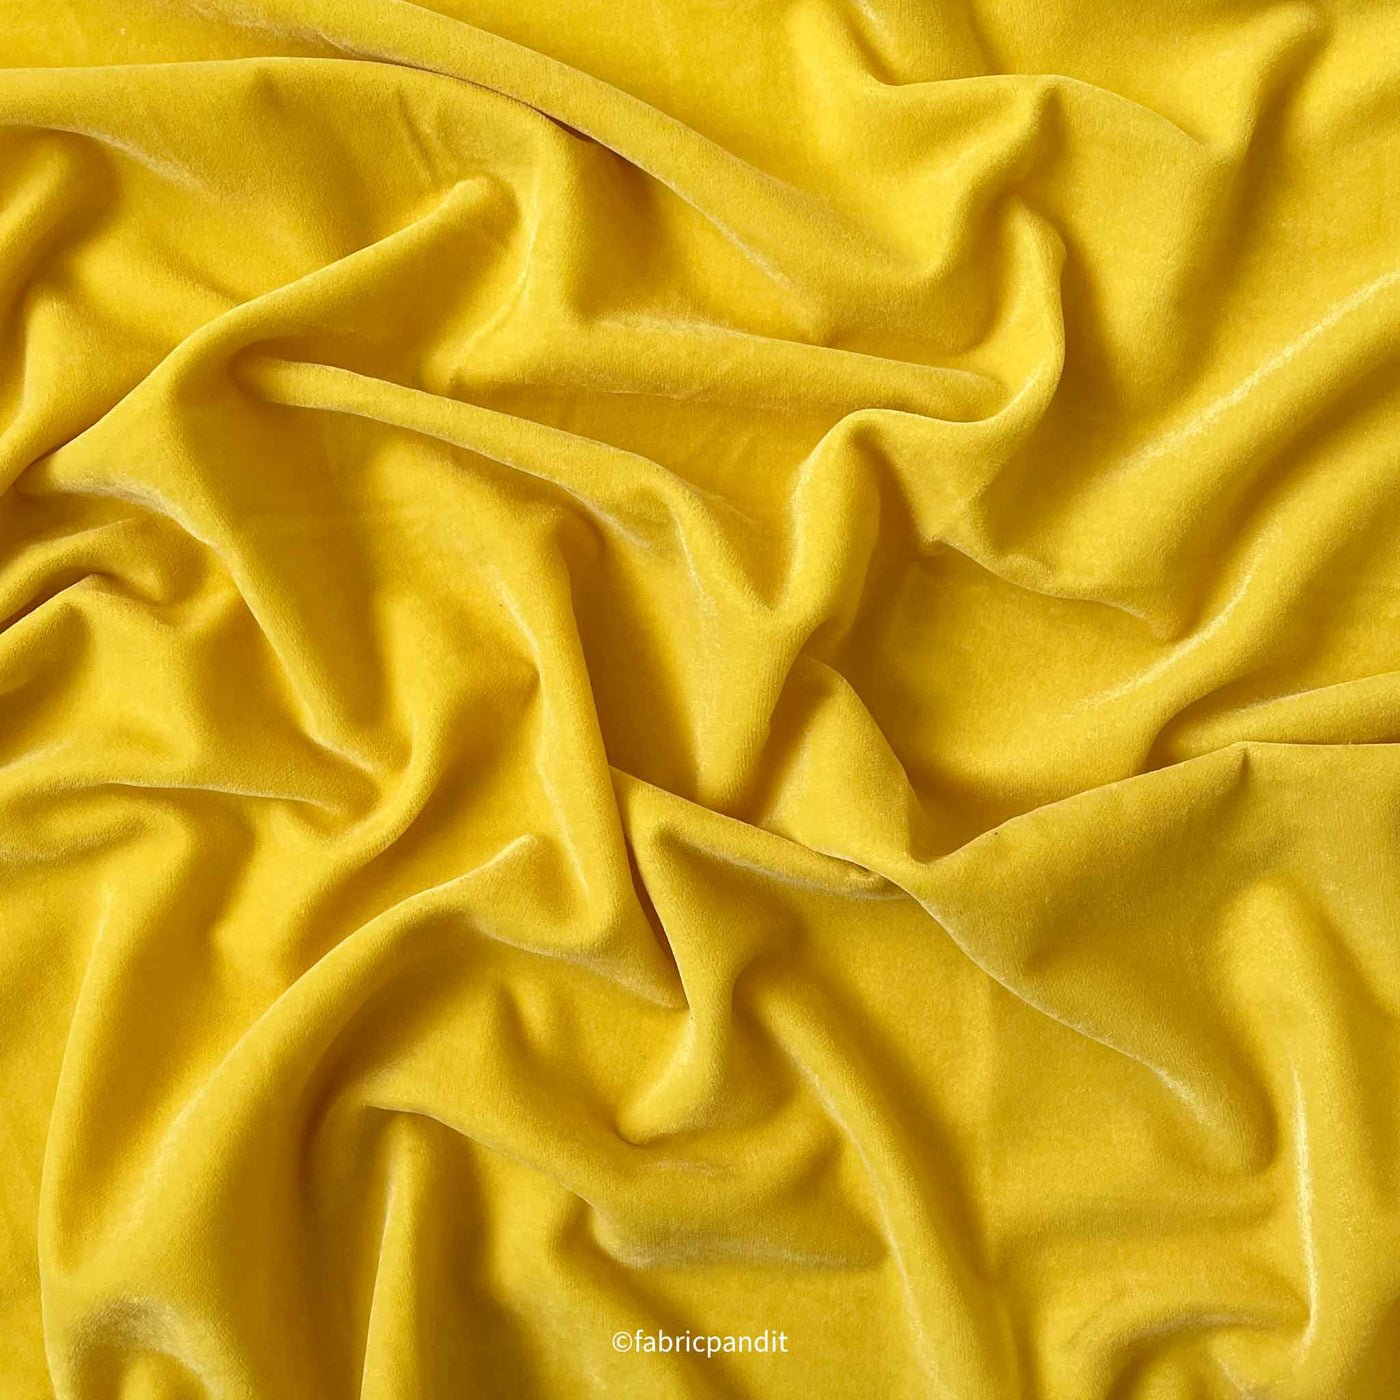 Fabric Pandit Fabric Mango Yellow Color Pure Velvet Fabric (Width 44 Inches)